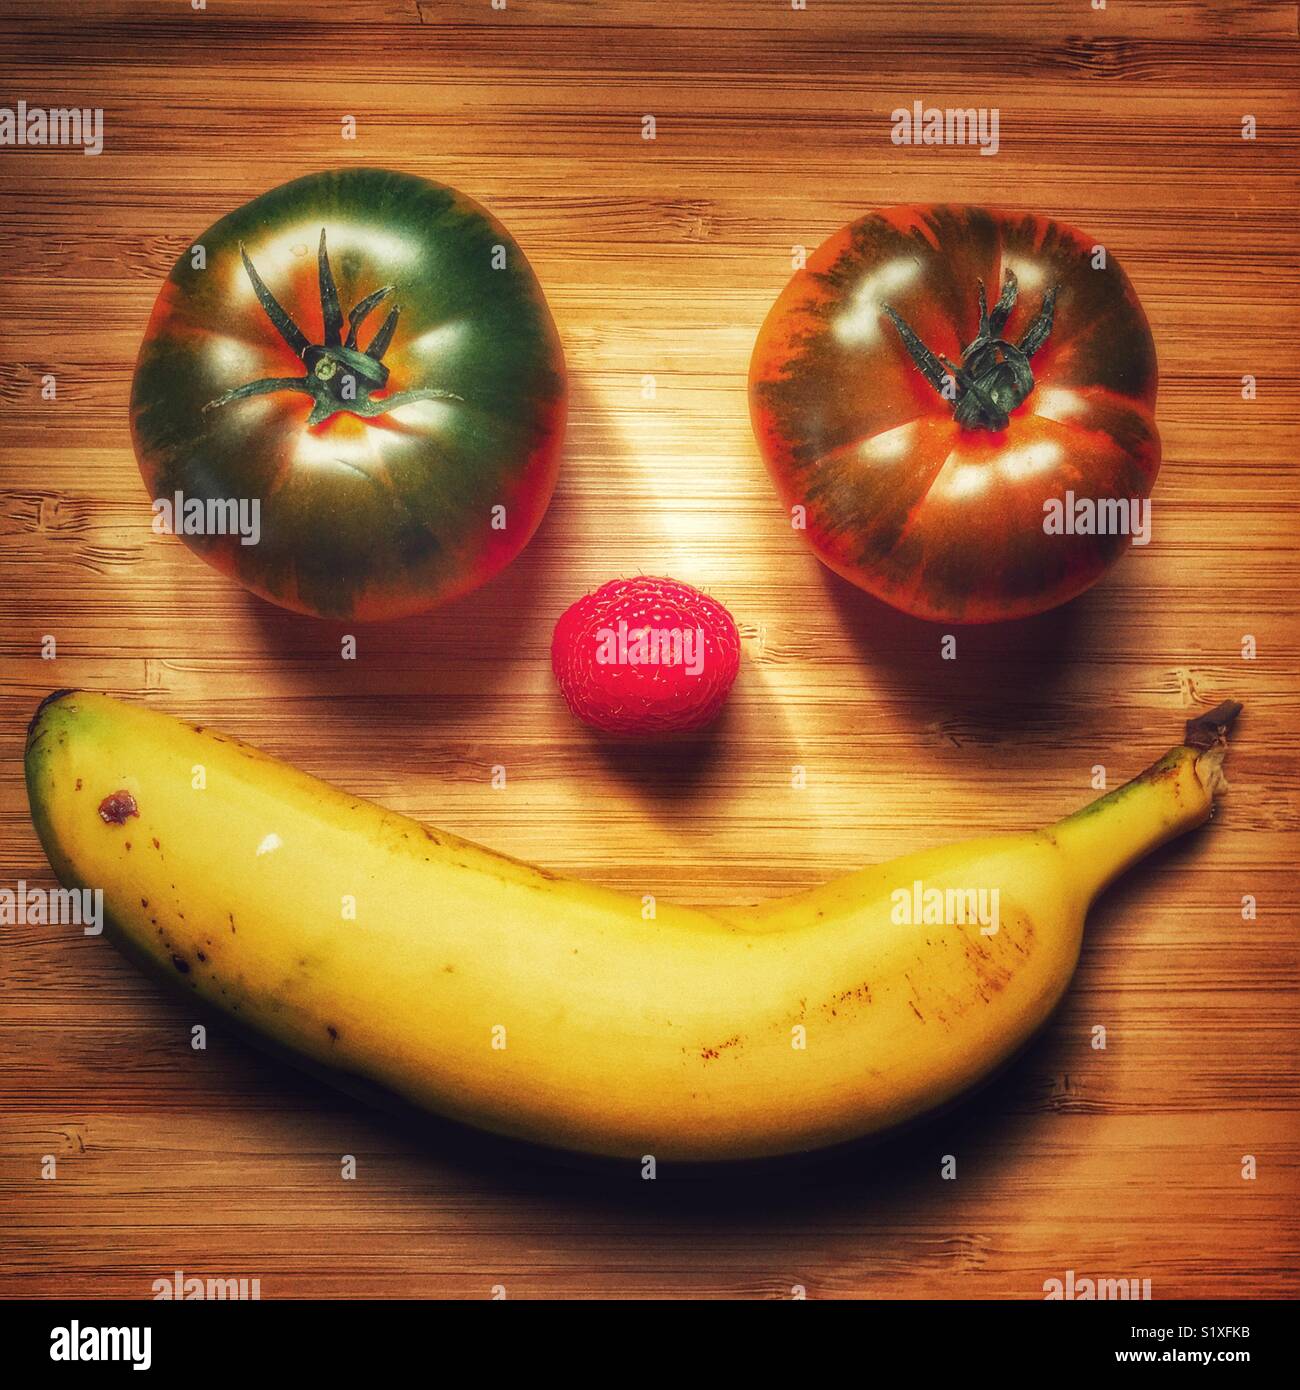 Fruit face, smiling, concept of healthy eating Stock Photo